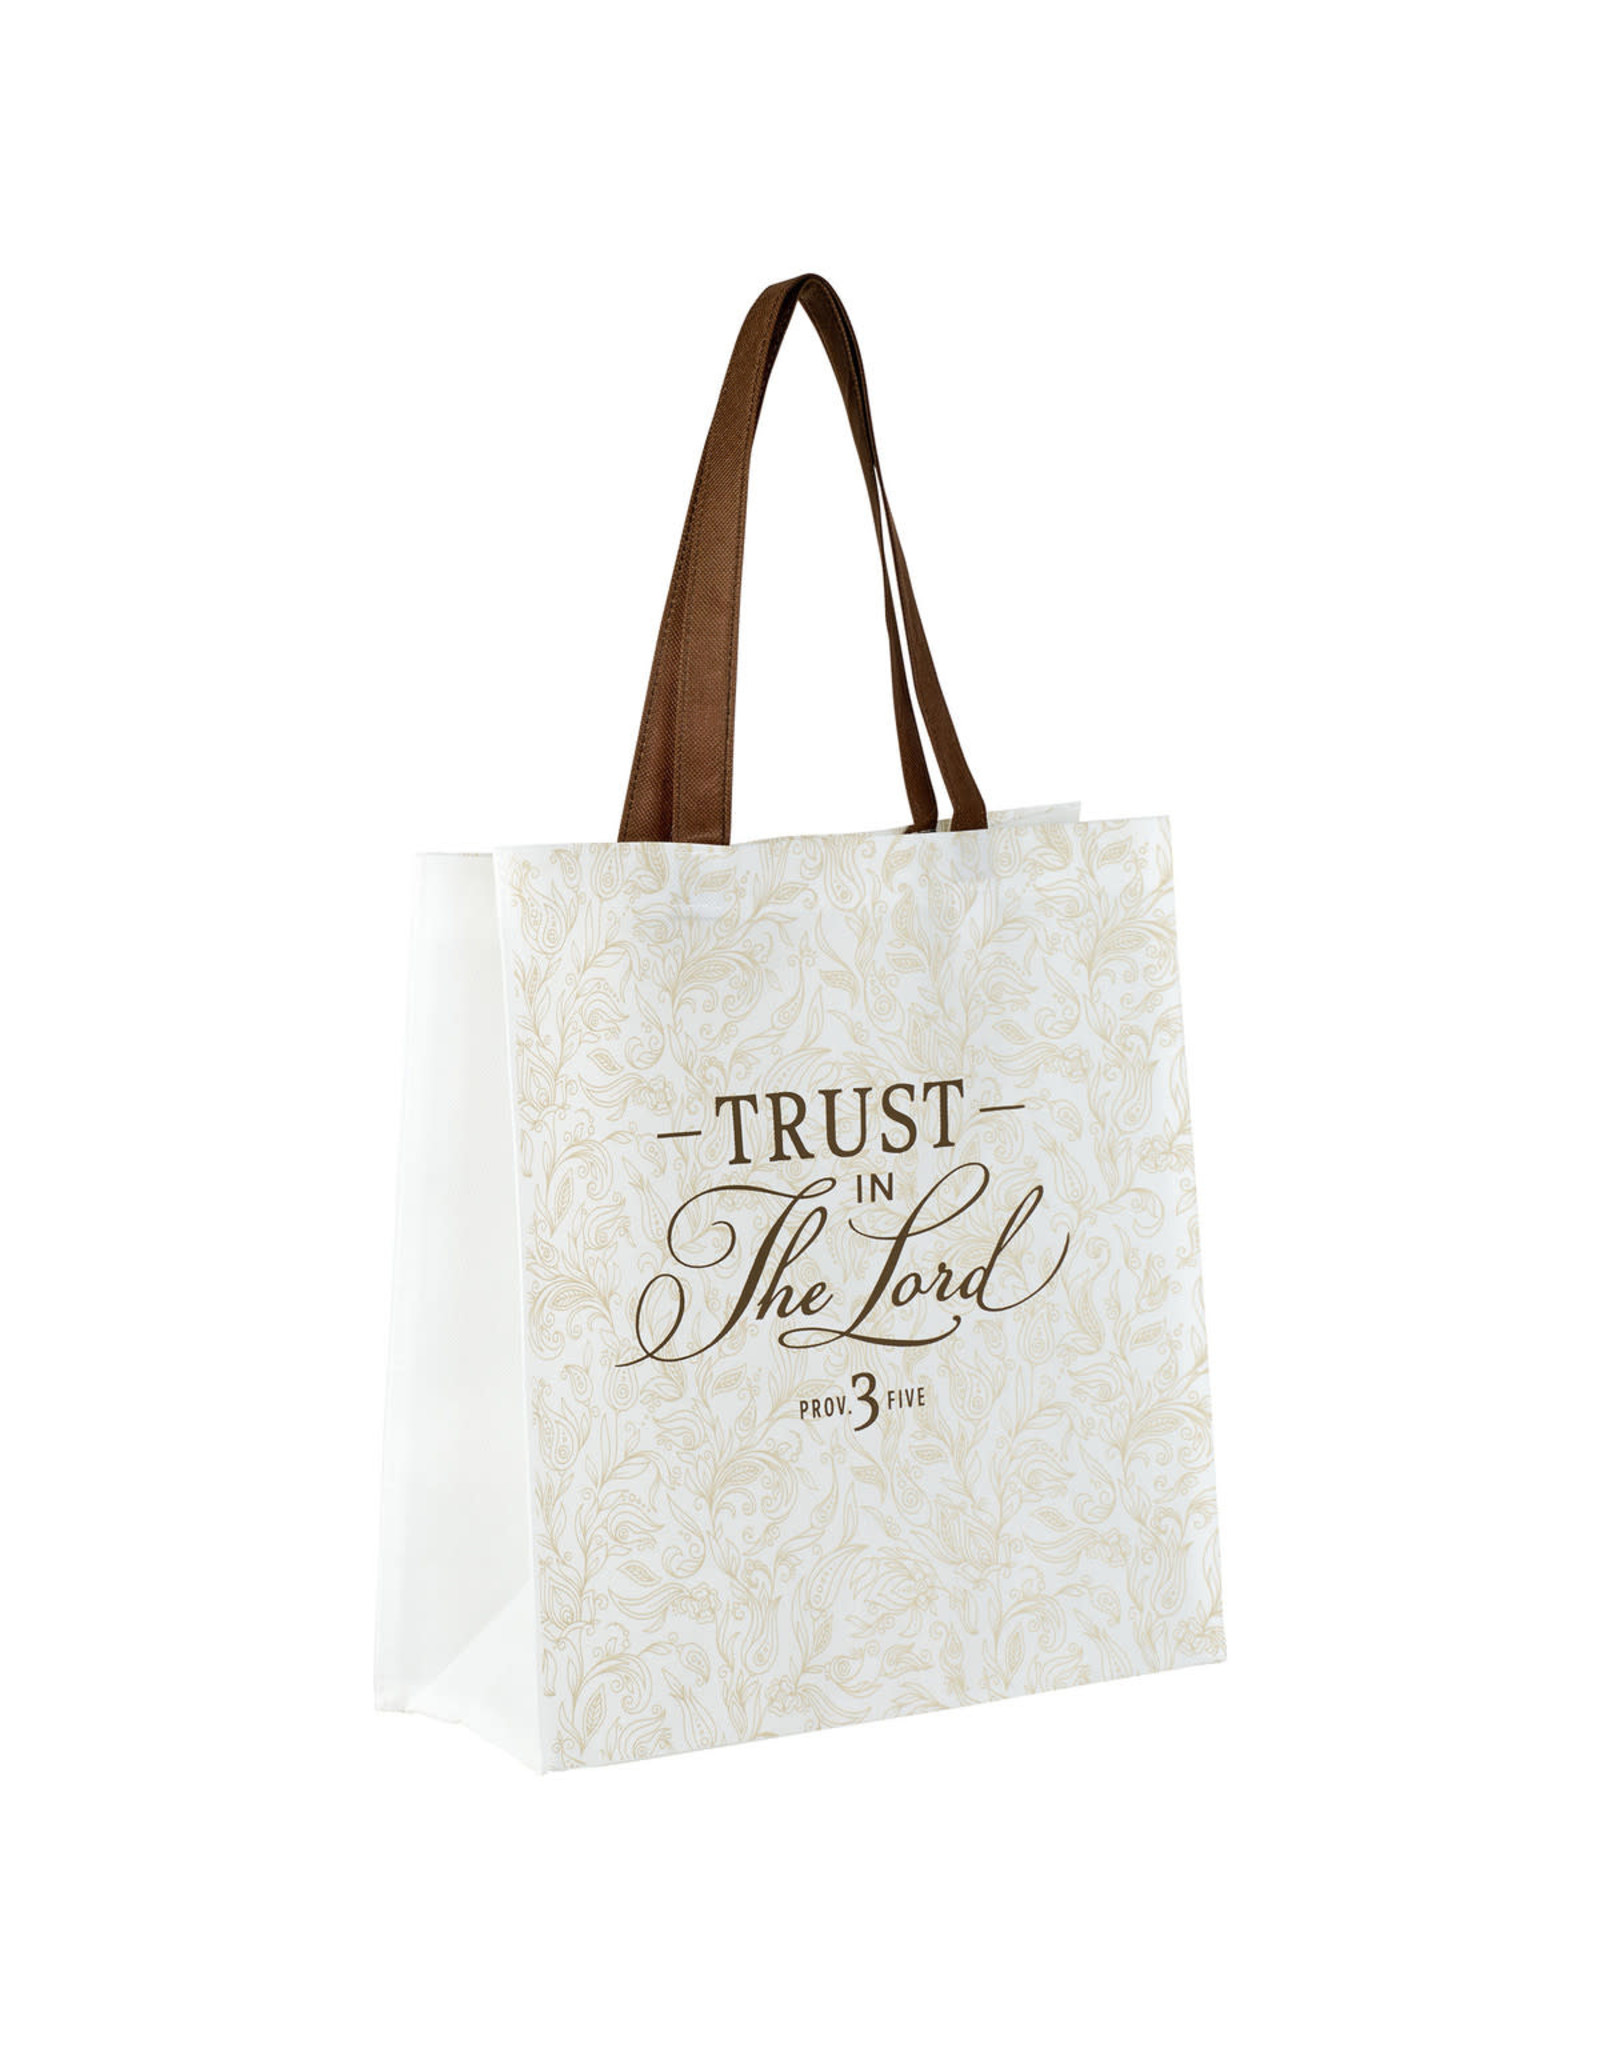 Christian Art Gifts Reusable Shopping Tote Bag - Trust in the Lord (White Floral)